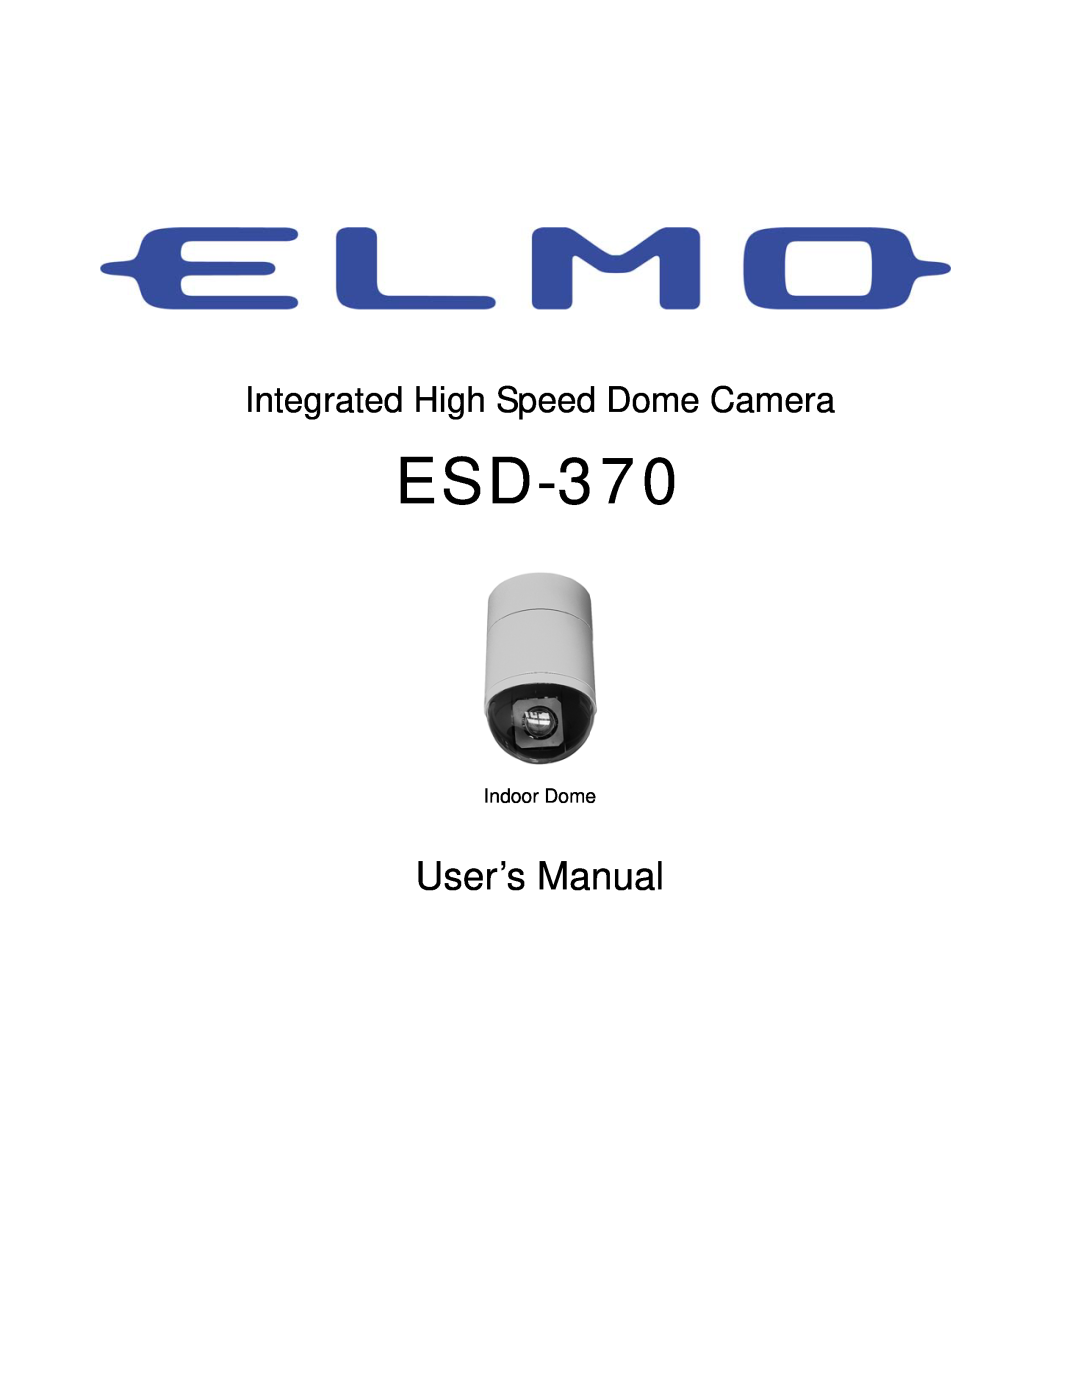 Elmo ESD-370 user manual User’s Manual, Integrated High Speed Dome Camera 